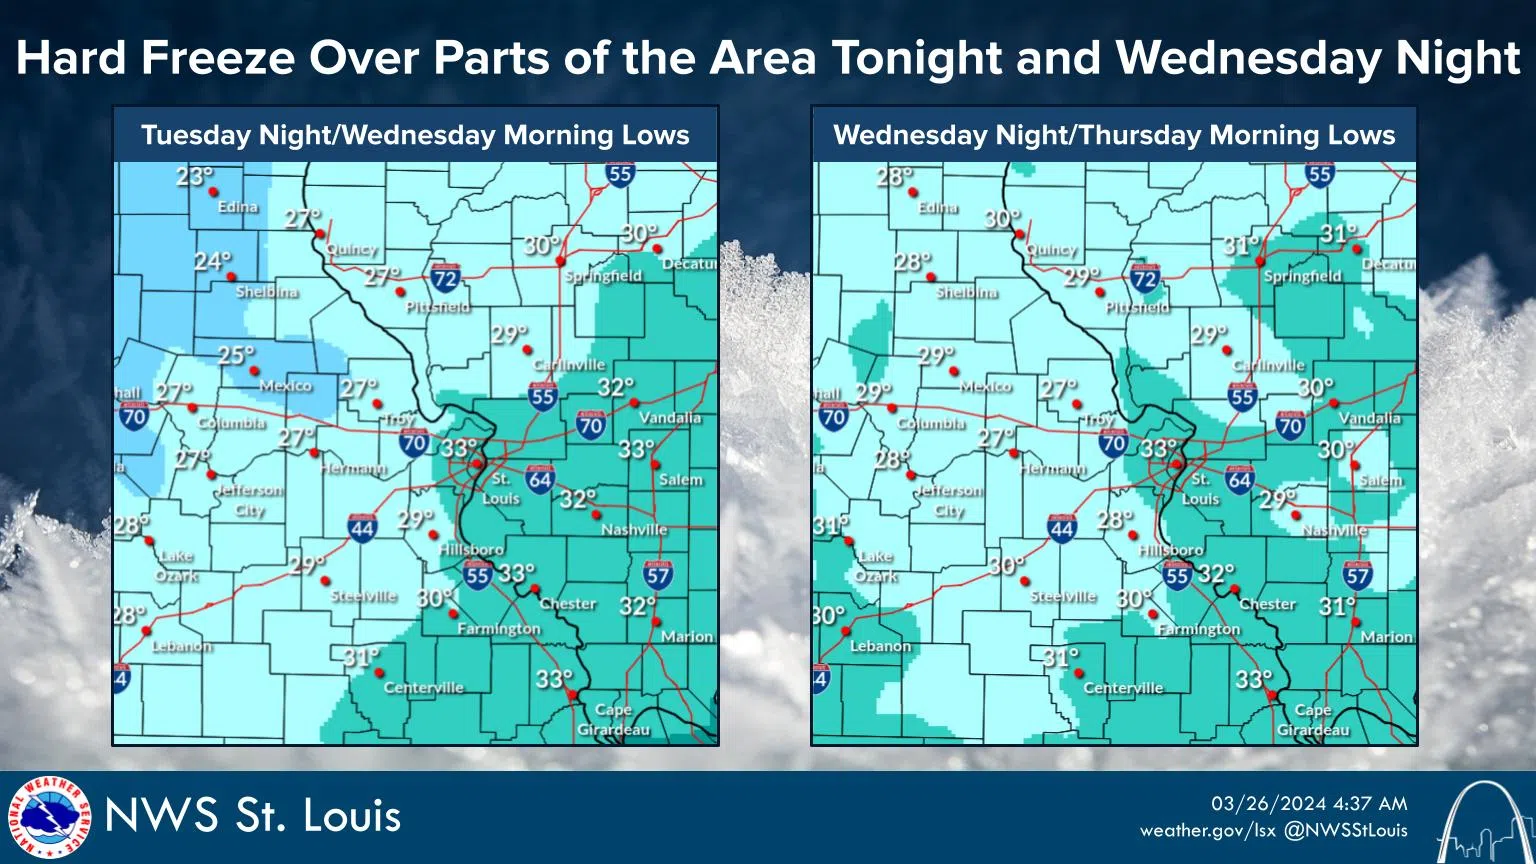 Scattered Showers this morning---Temperatures potentially below freezing tonight and Wednesday night